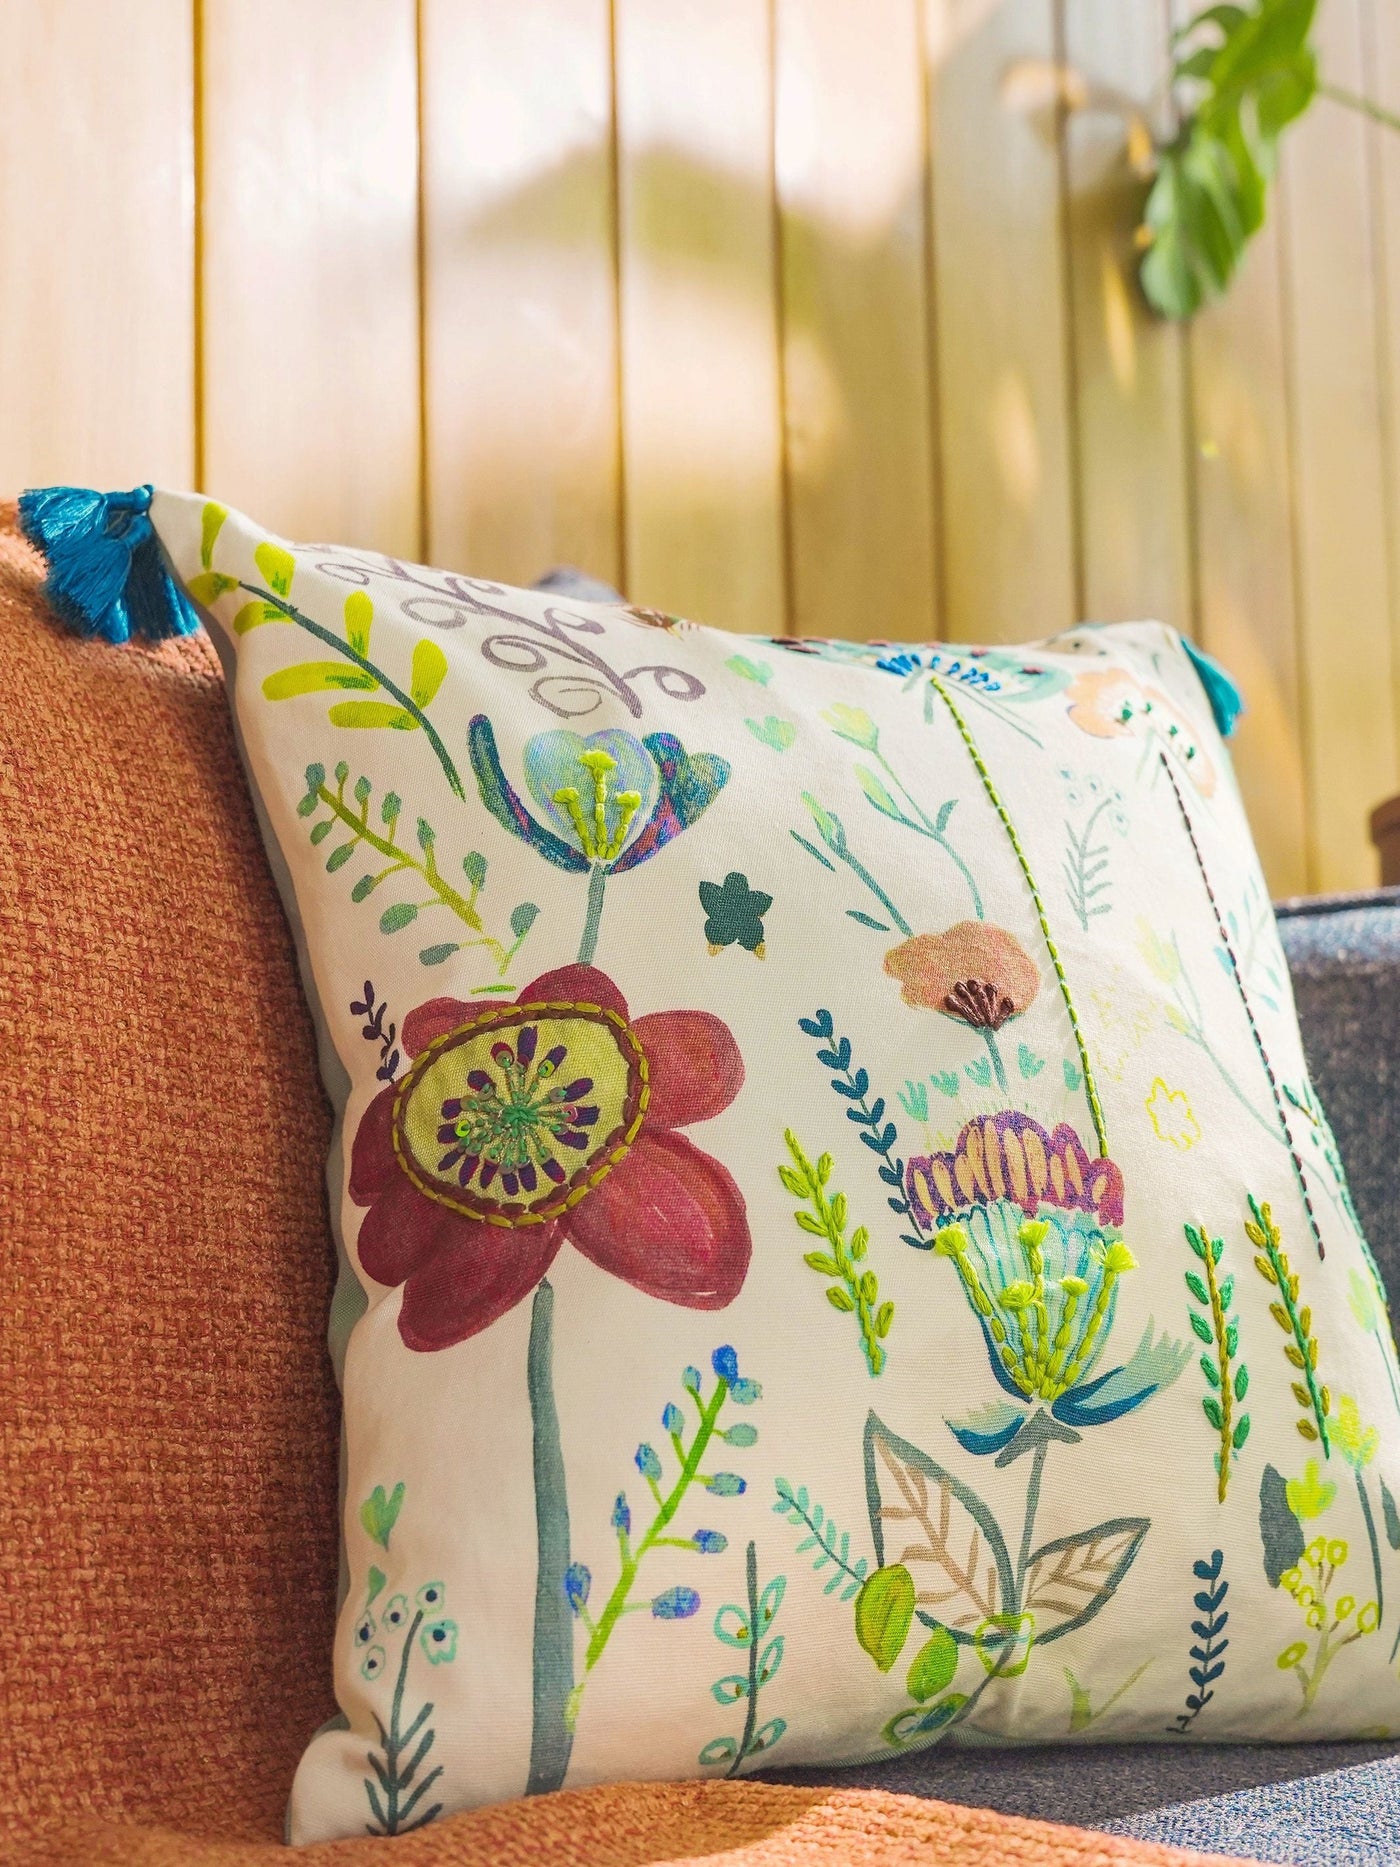 Hand Painted Cushion Cover - Gardenscape Turquoise with Kantha Stitch